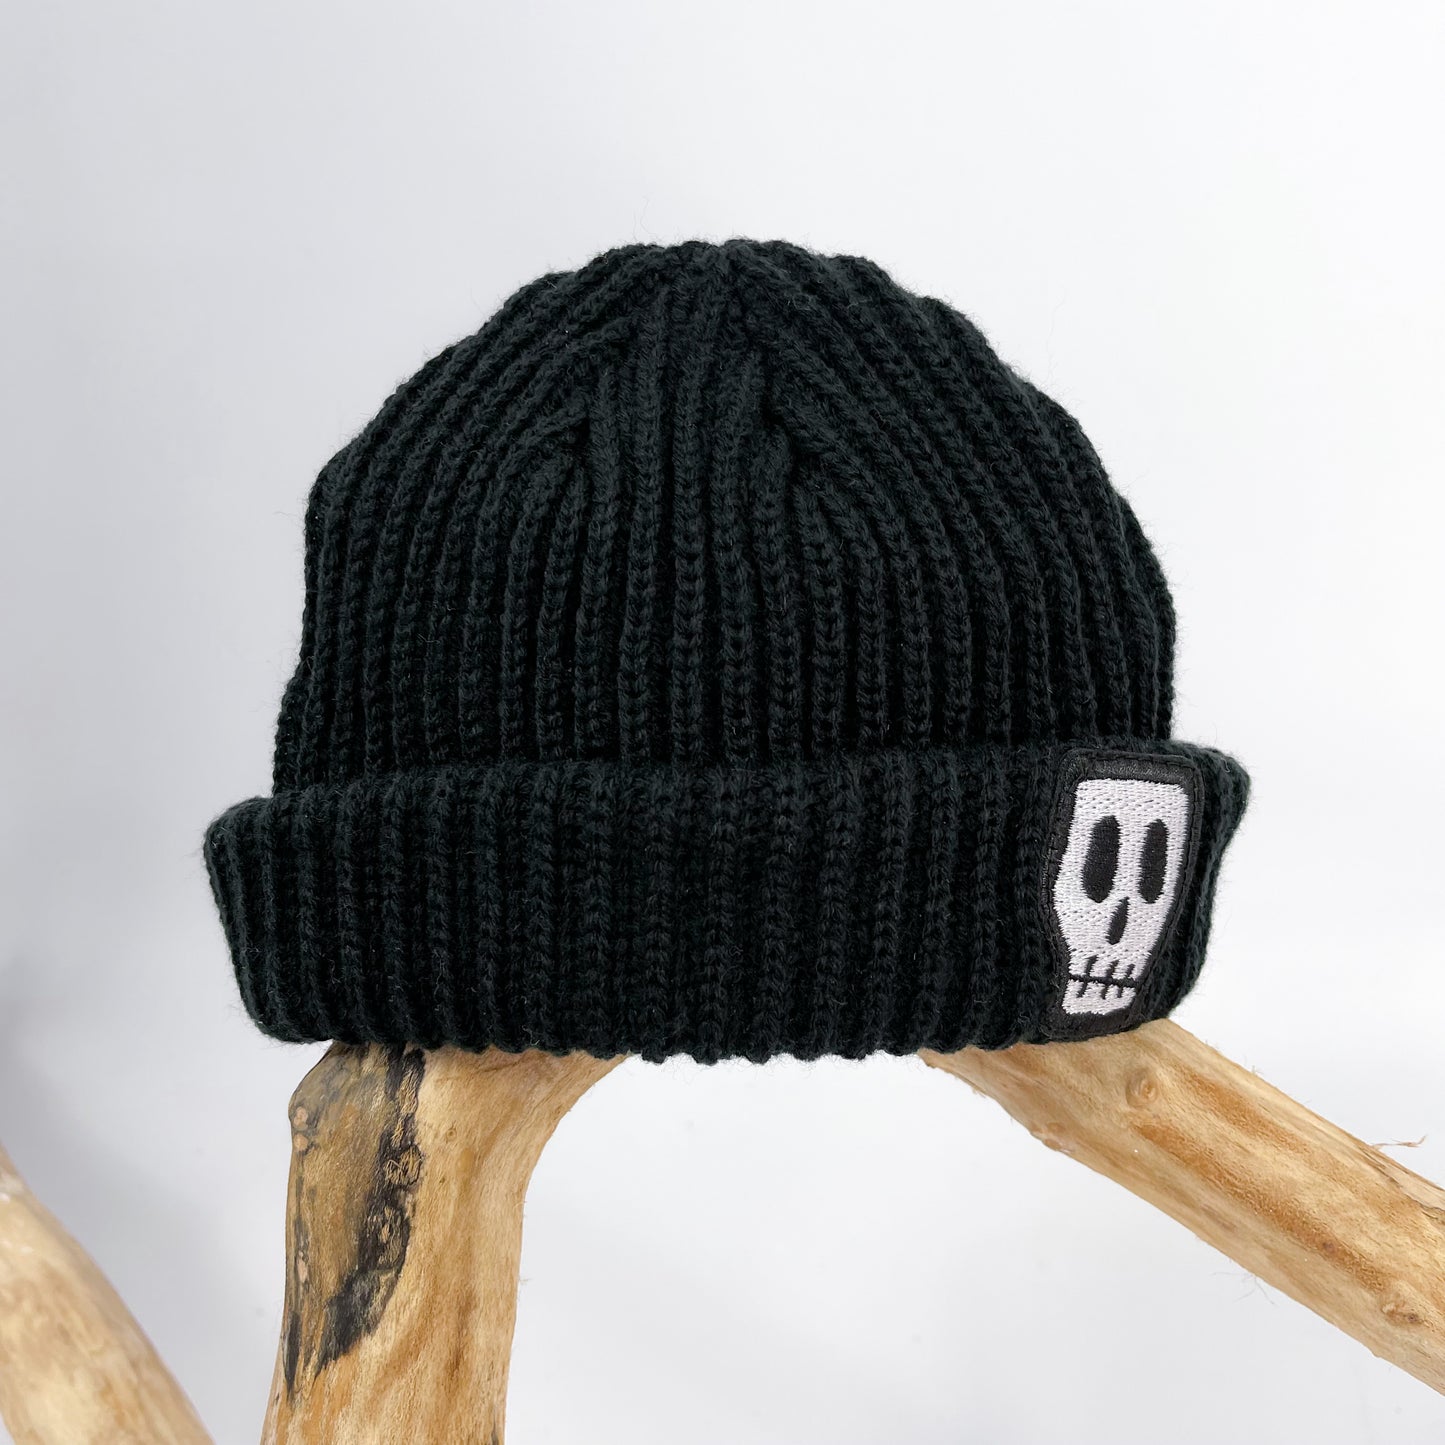 Kids trawler beanie, black with embroidered Skelly Skull logo 